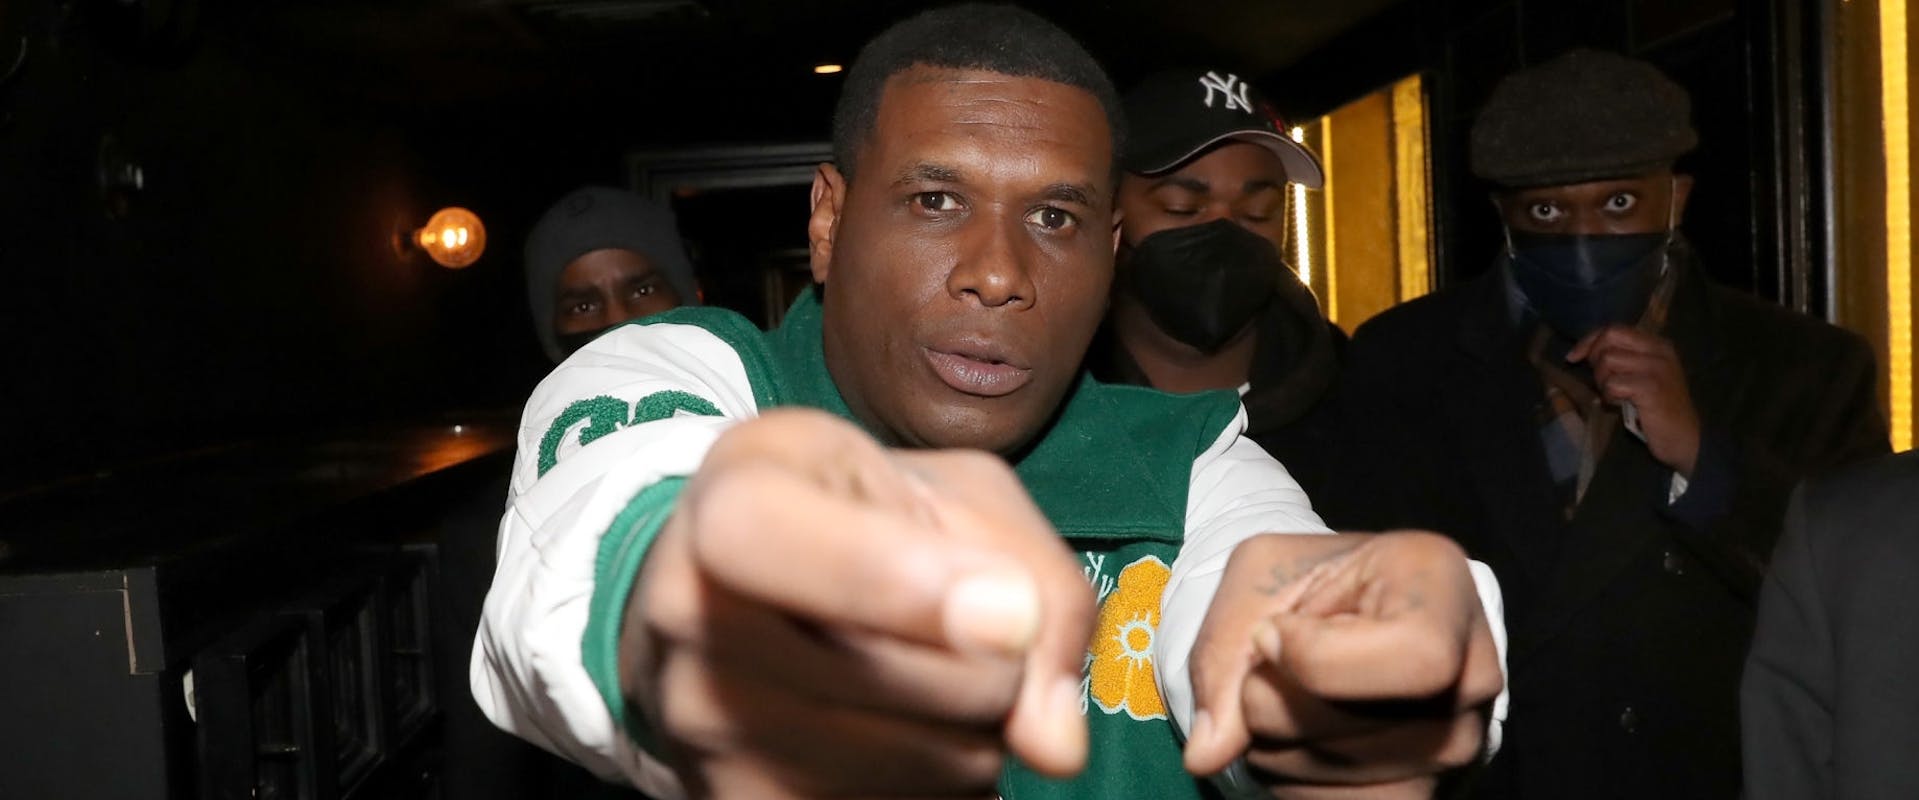 Jay Electronica backstage at Sony Hall on January 10, 2022 in New York City.